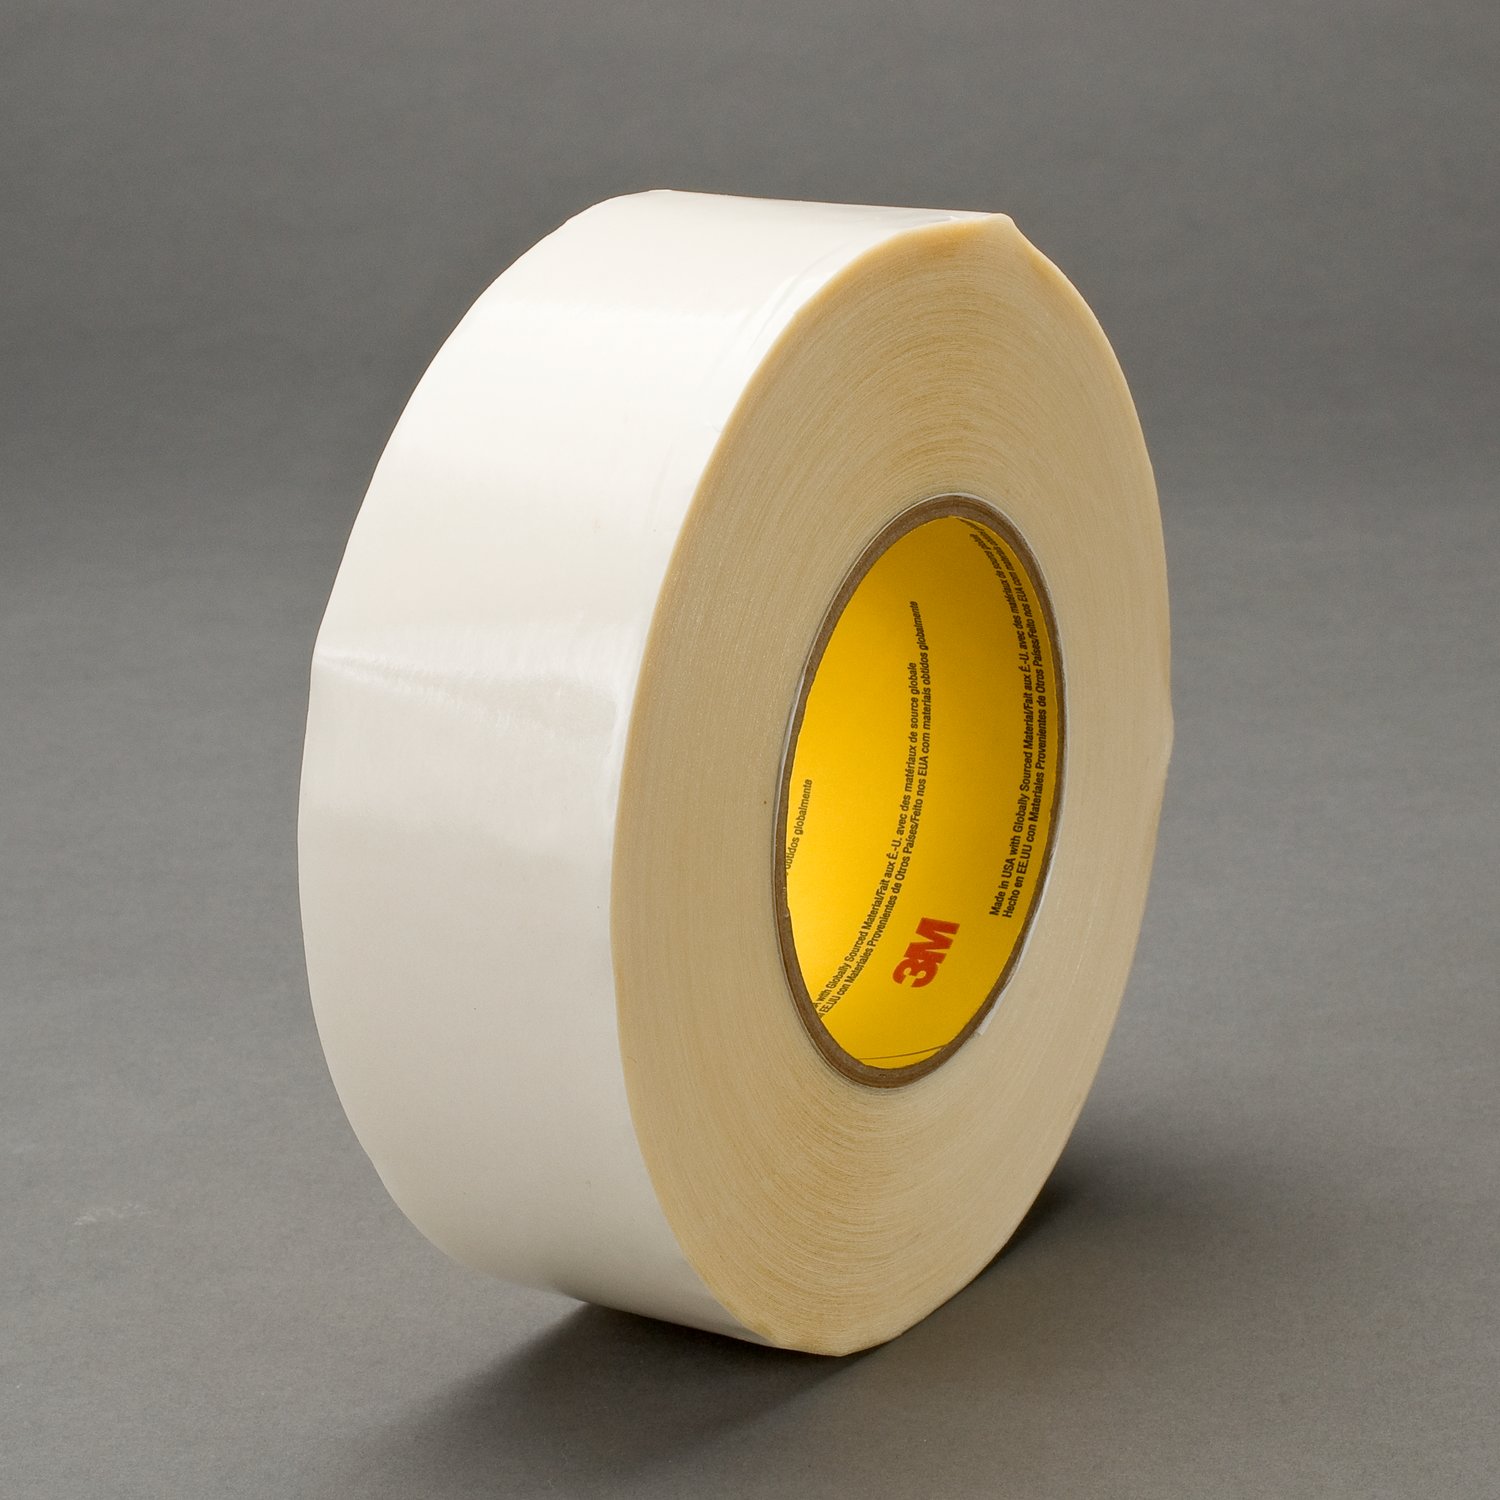 7000124337 - 3M Double Coated Tape 9741, Clear, 36 mm x 55 m, 6.5 mil, 32 rolls per
case